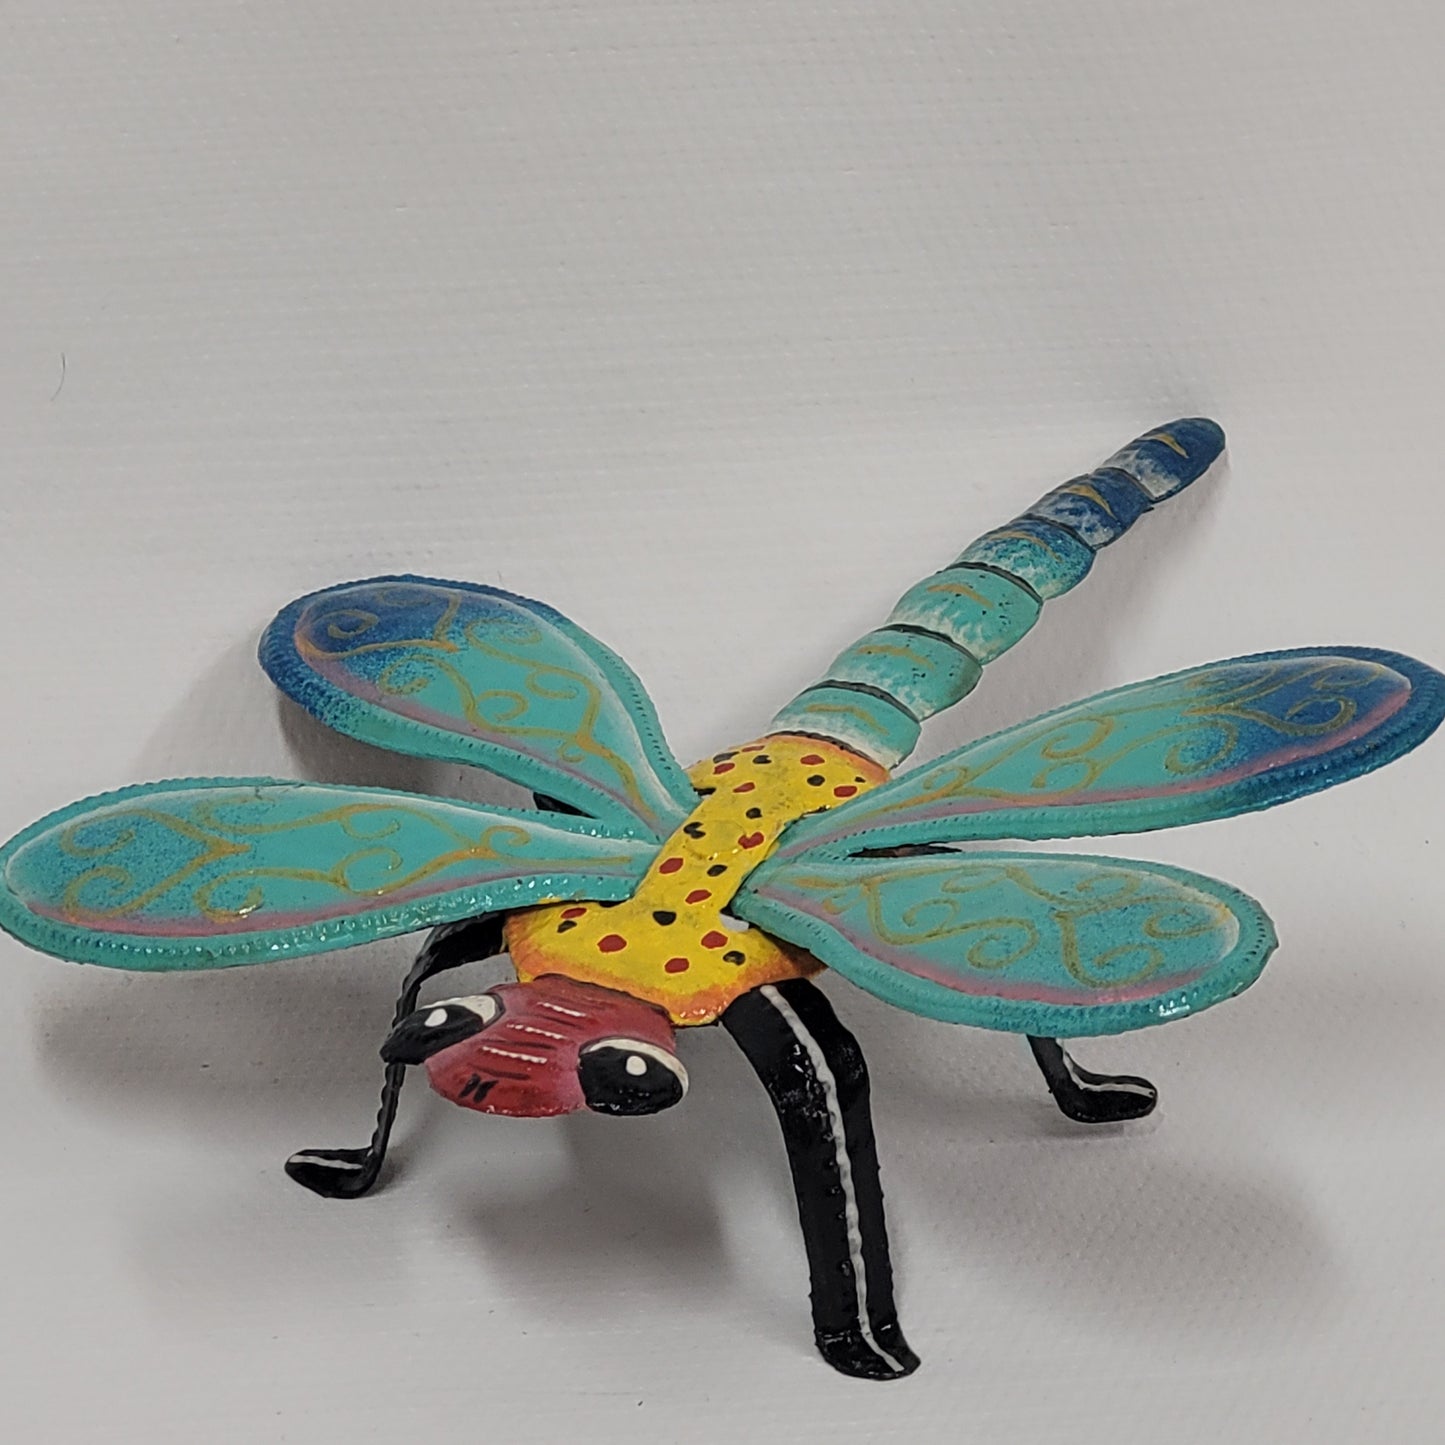 Dragonfly Metal Art by Papillon